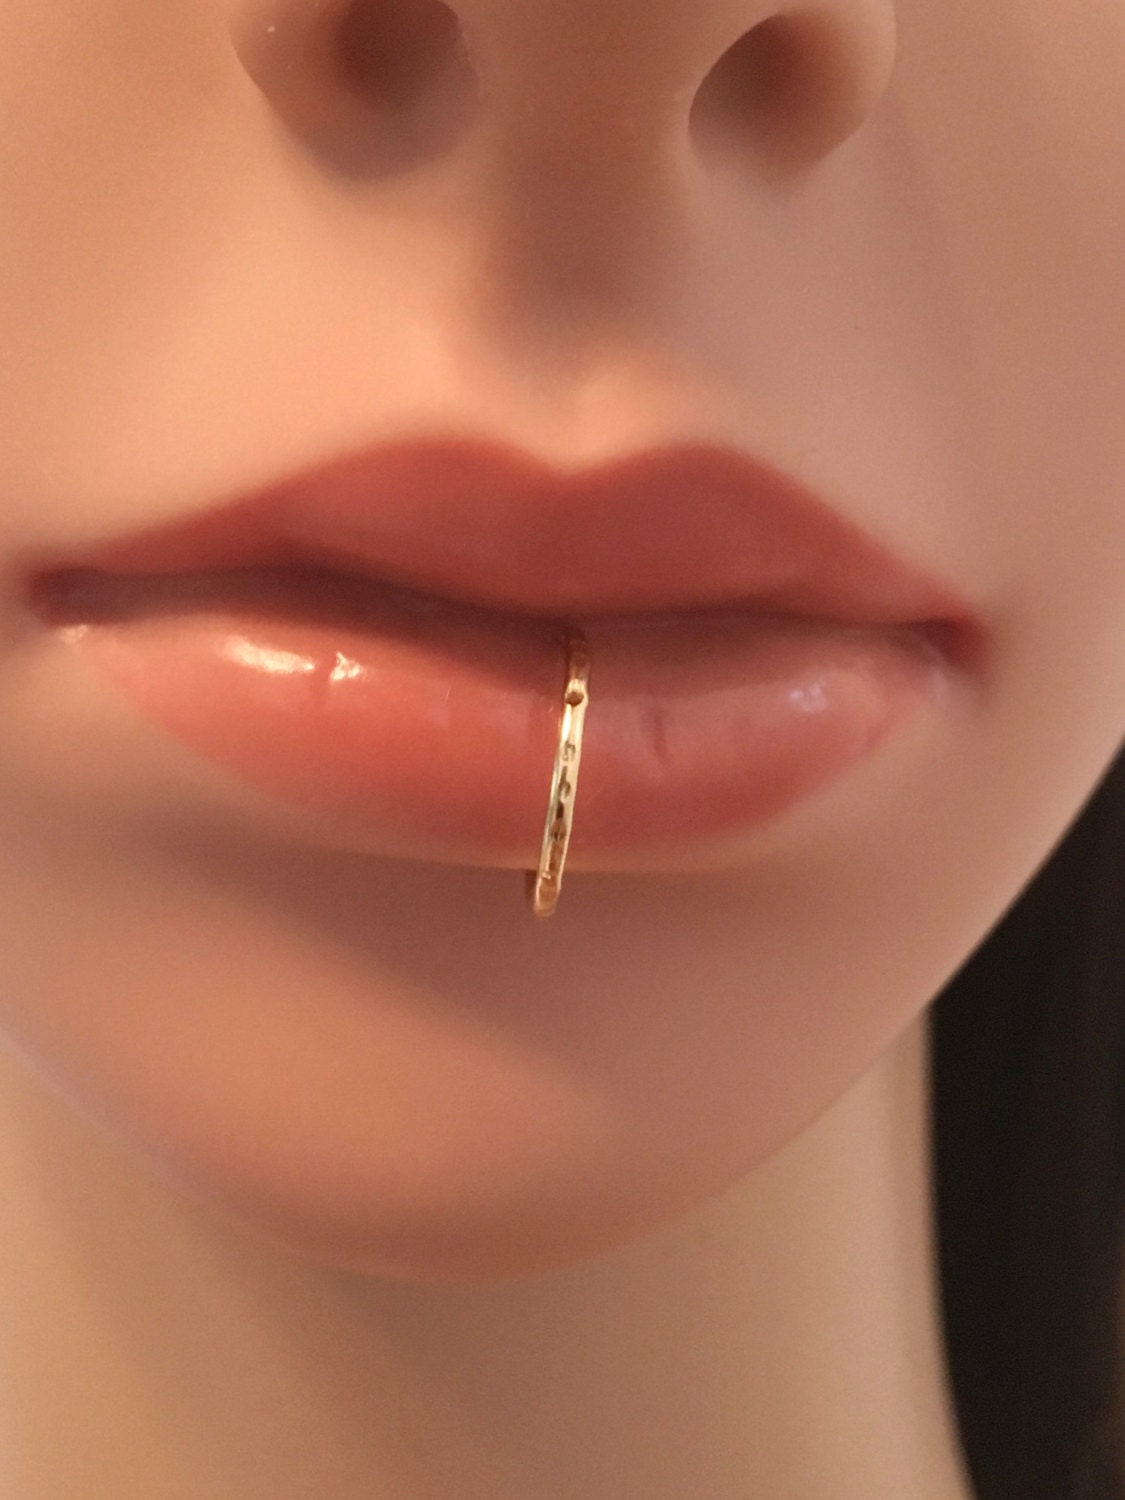 Gold Lip Ring lip jewelry silver hoop tiny lip ring gold